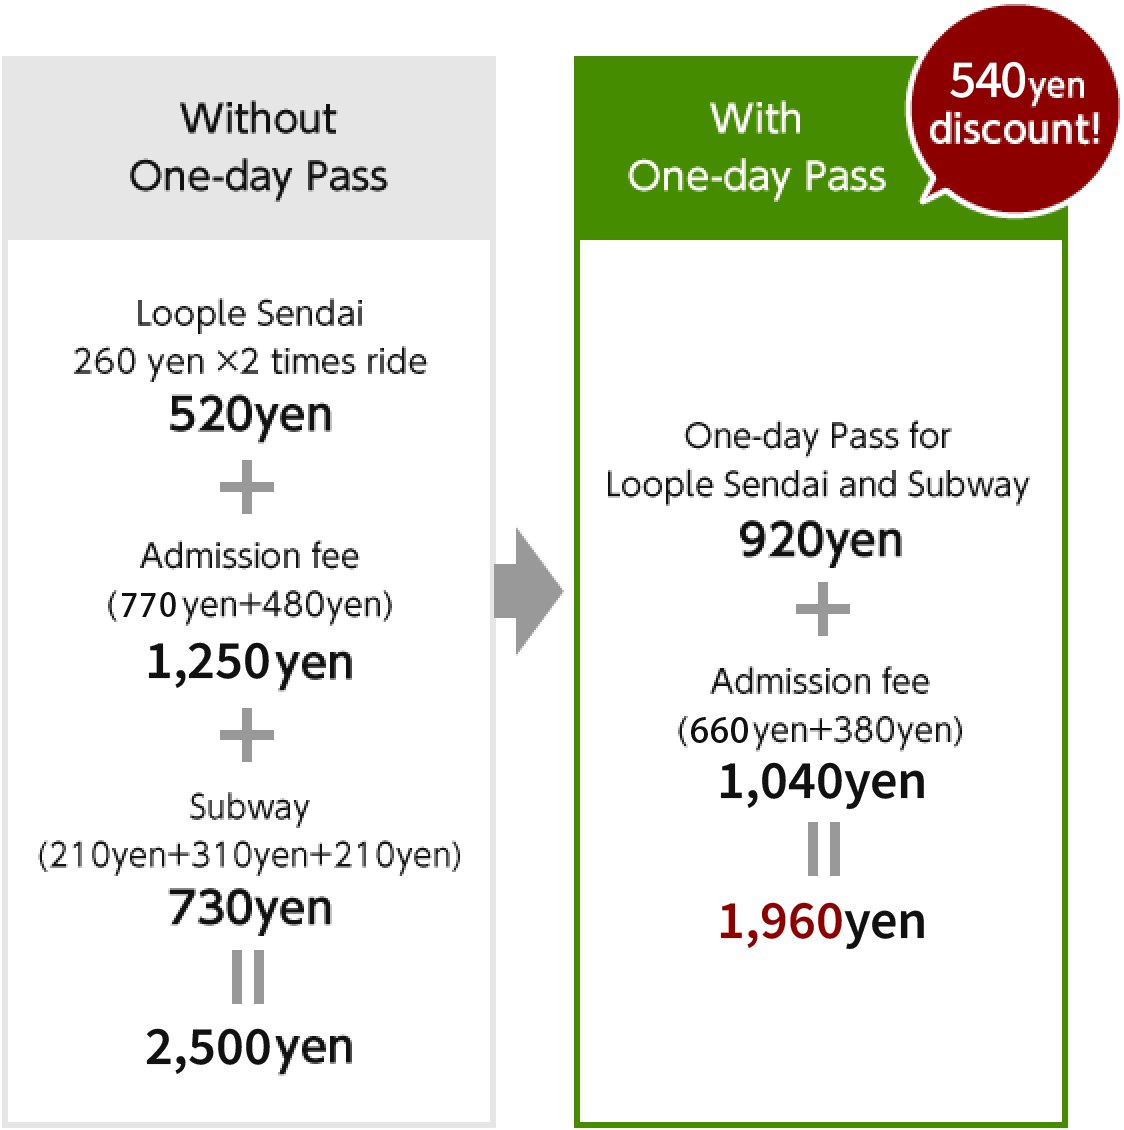 【Without Common One-Day Ticket】2,430yen 【With Common One-Day Ticket】1,800yen 630yen discount!